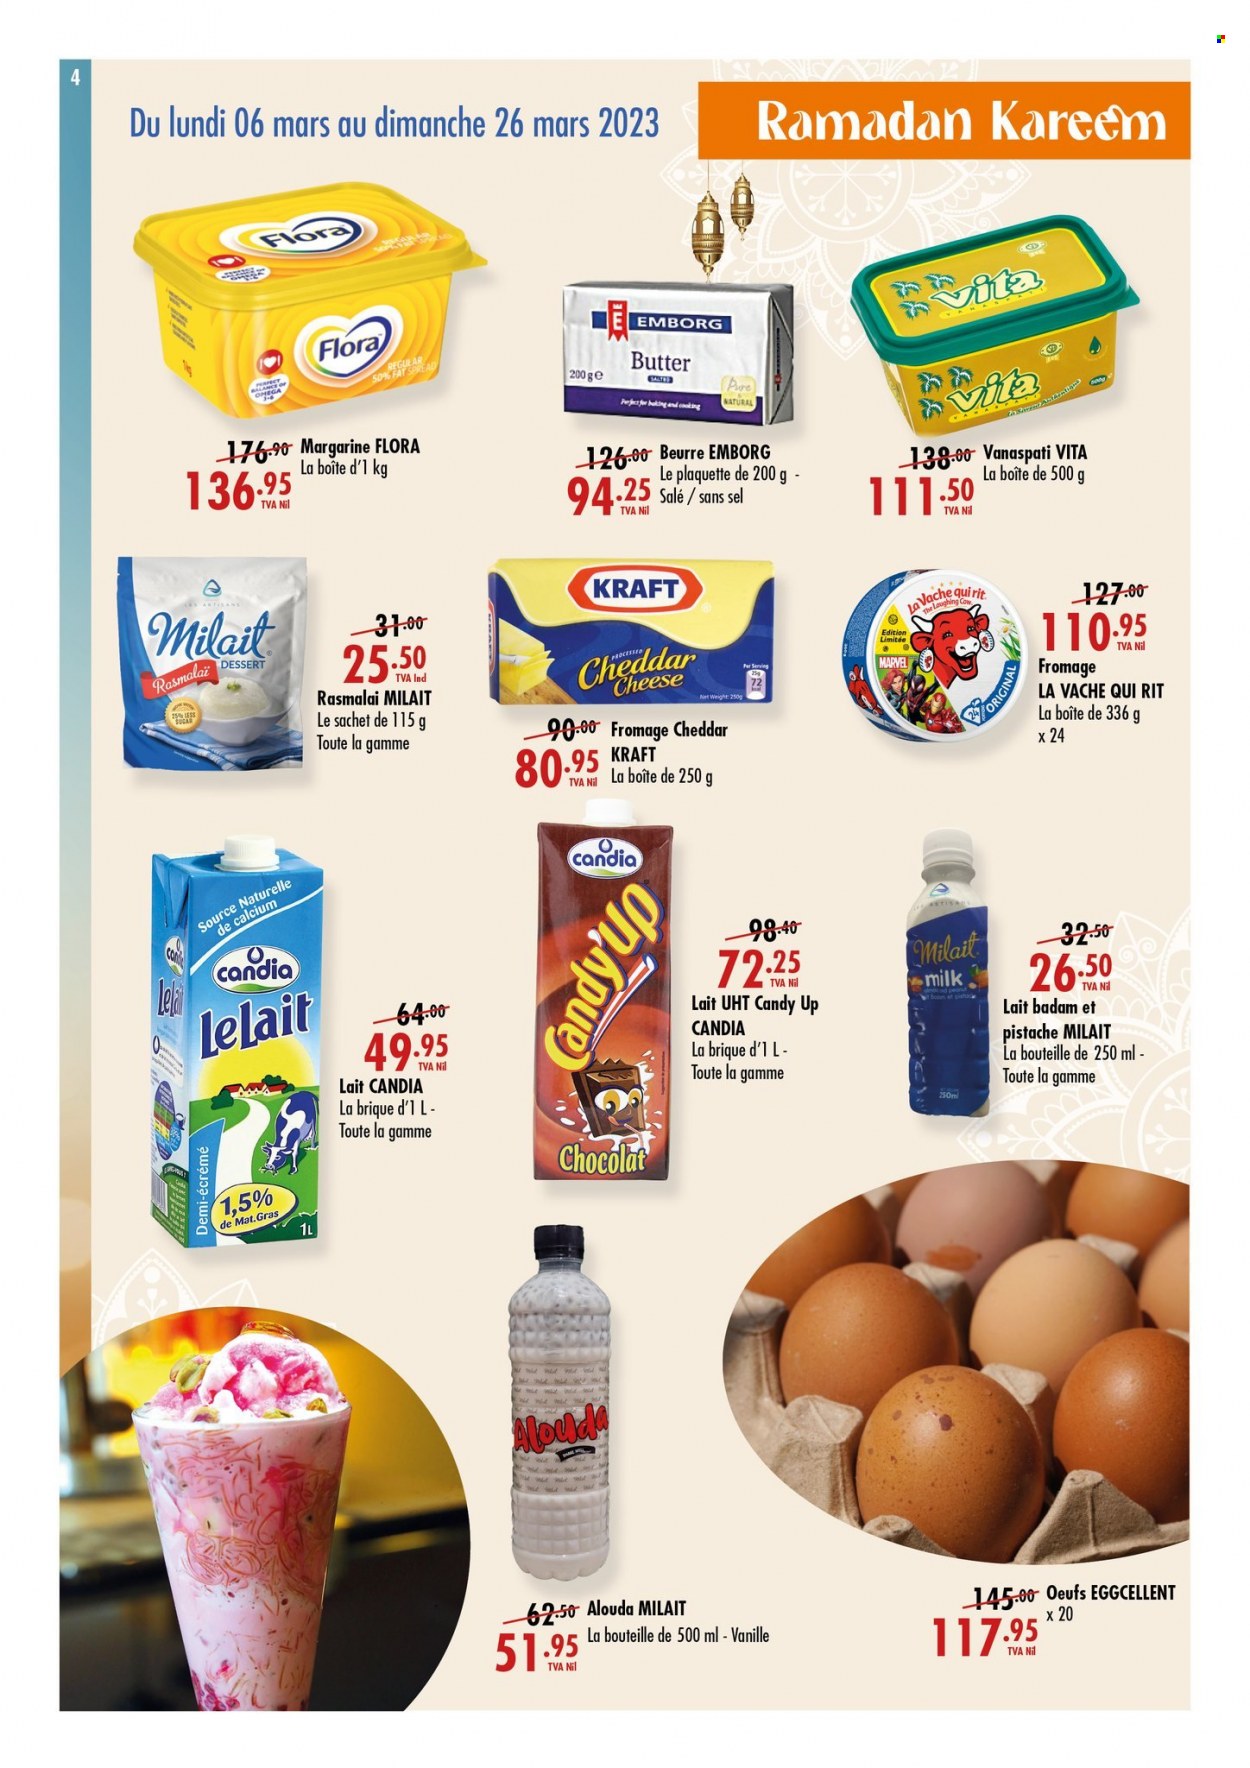 thumbnail - Jumbo Catalogue - 6.03.2023 - 24.04.2023 - Sales products - Kraft®, cheddar, cheese, The Laughing Cow, milk, butter, margarine, fat spread, Flora, Mars, calcium. Page 4.